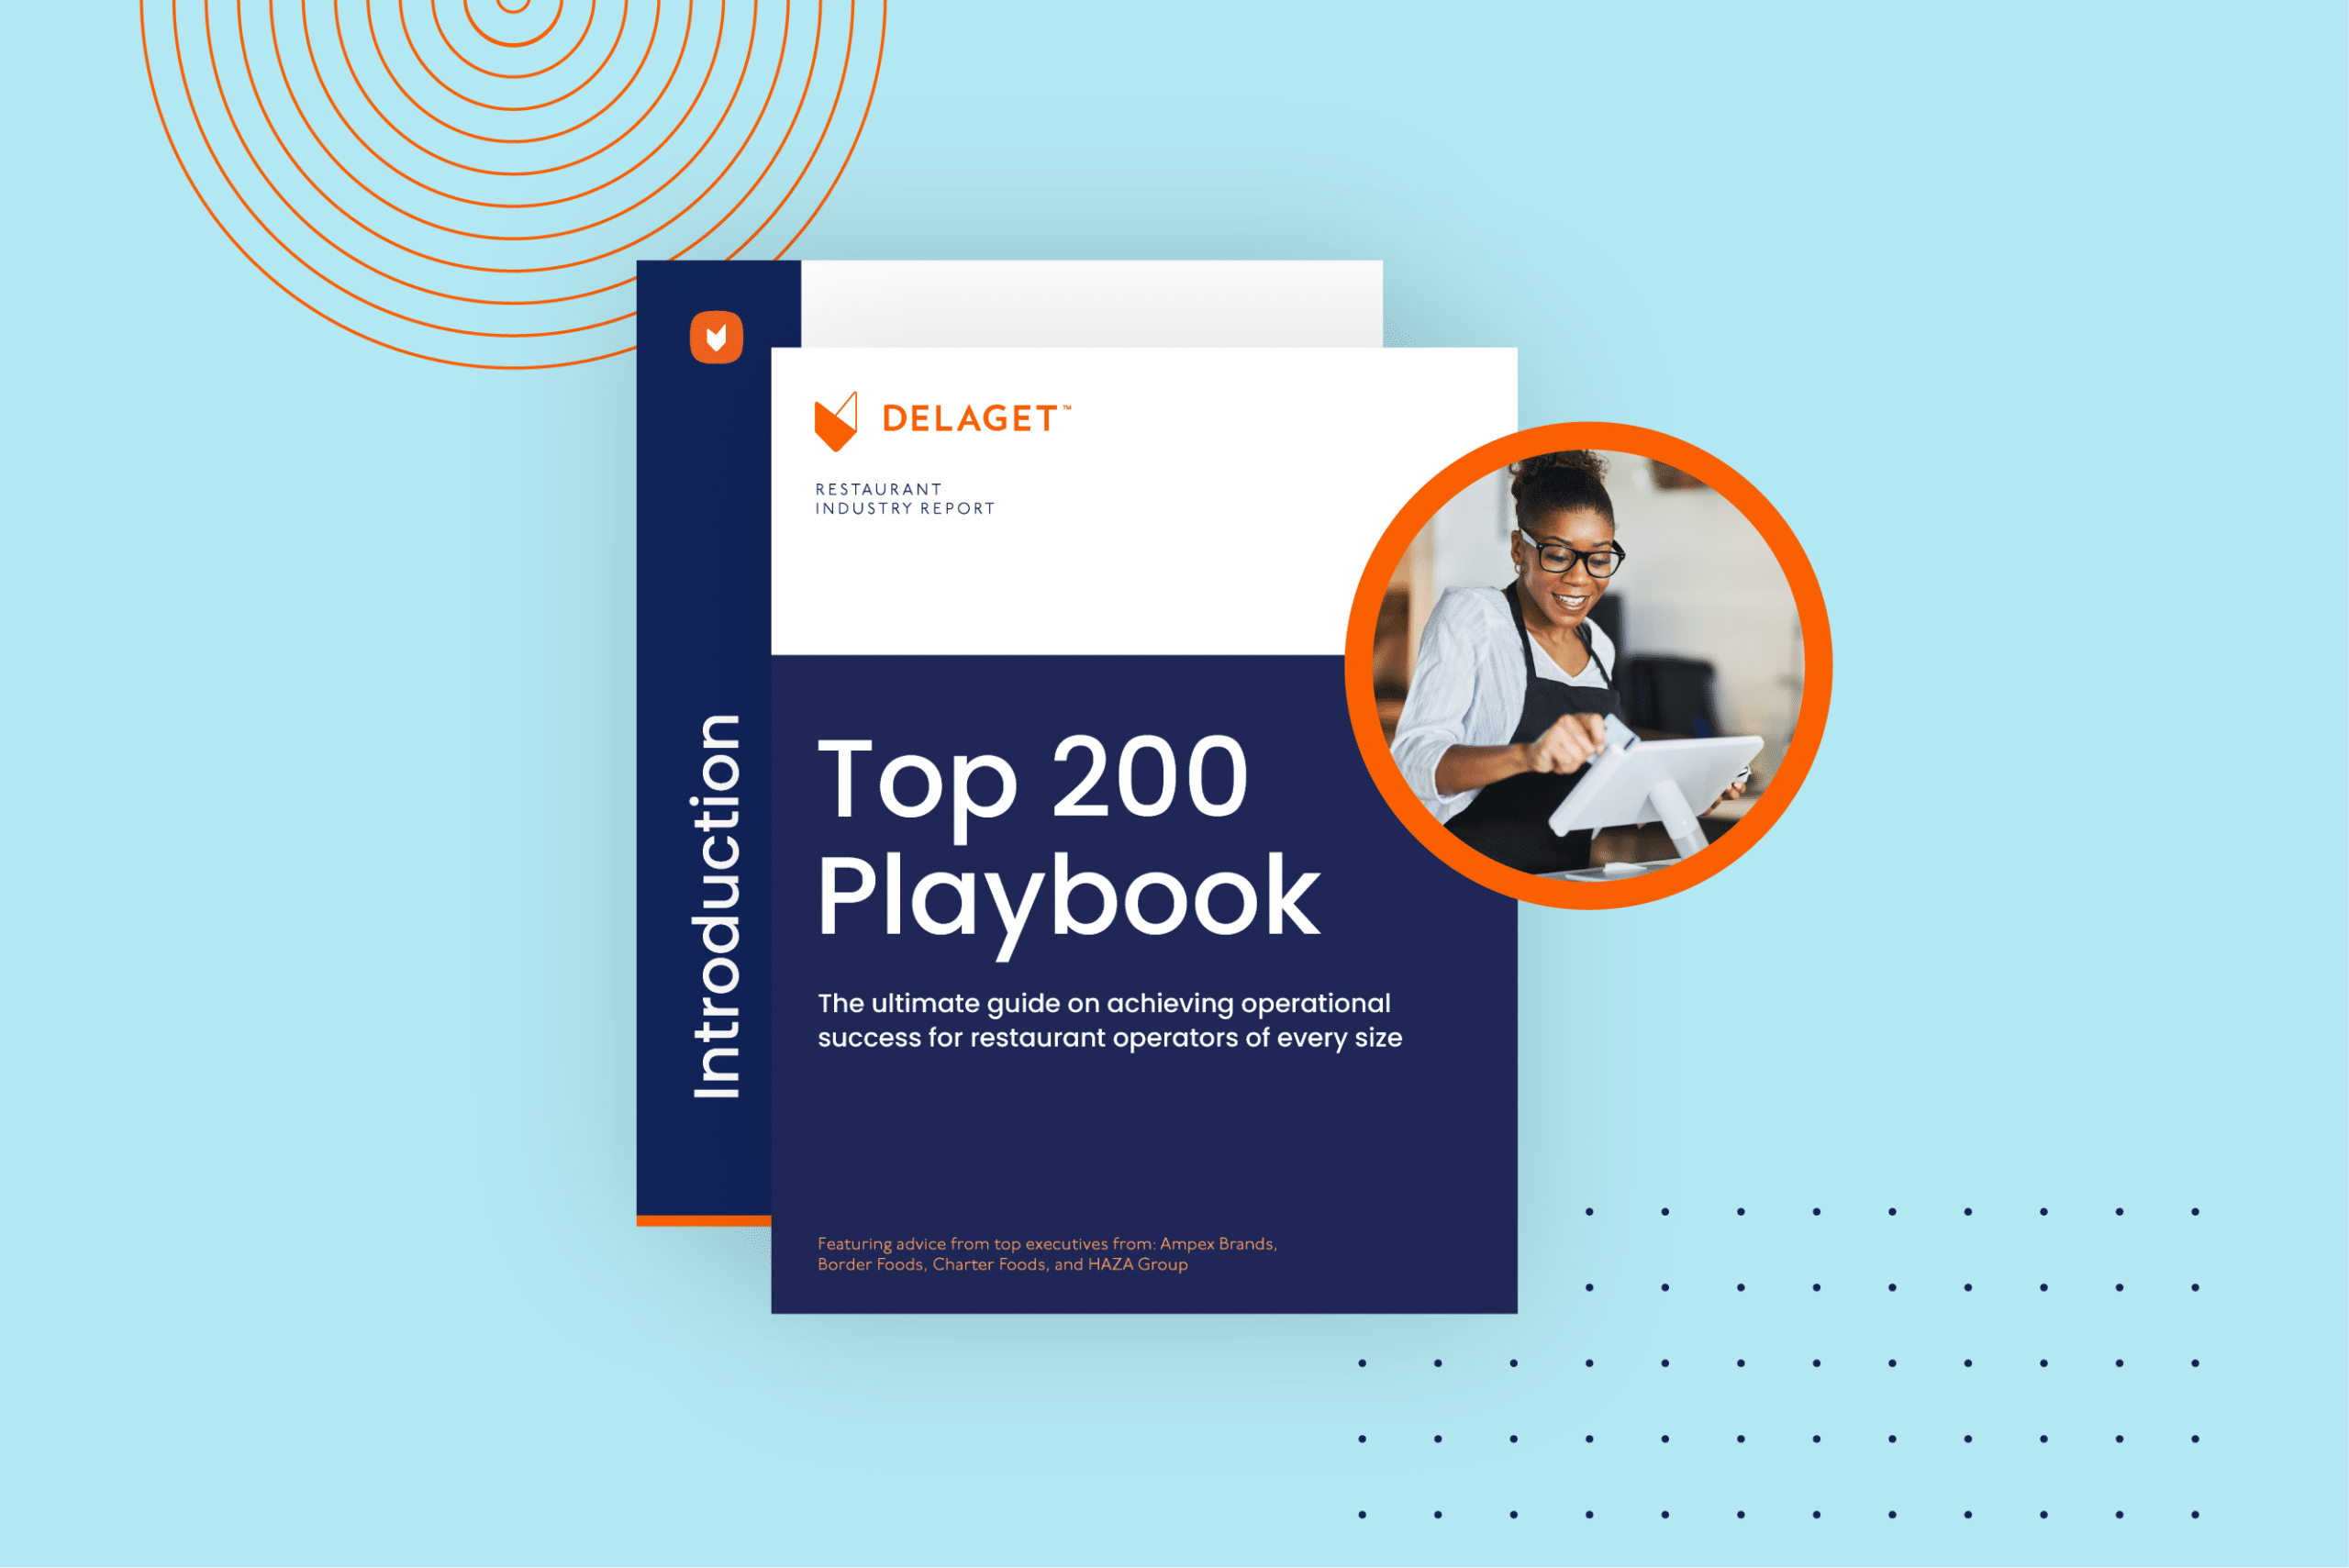 Top 200 Playbook: The ultimate guide on achieving operational success for restaurant operators of every size